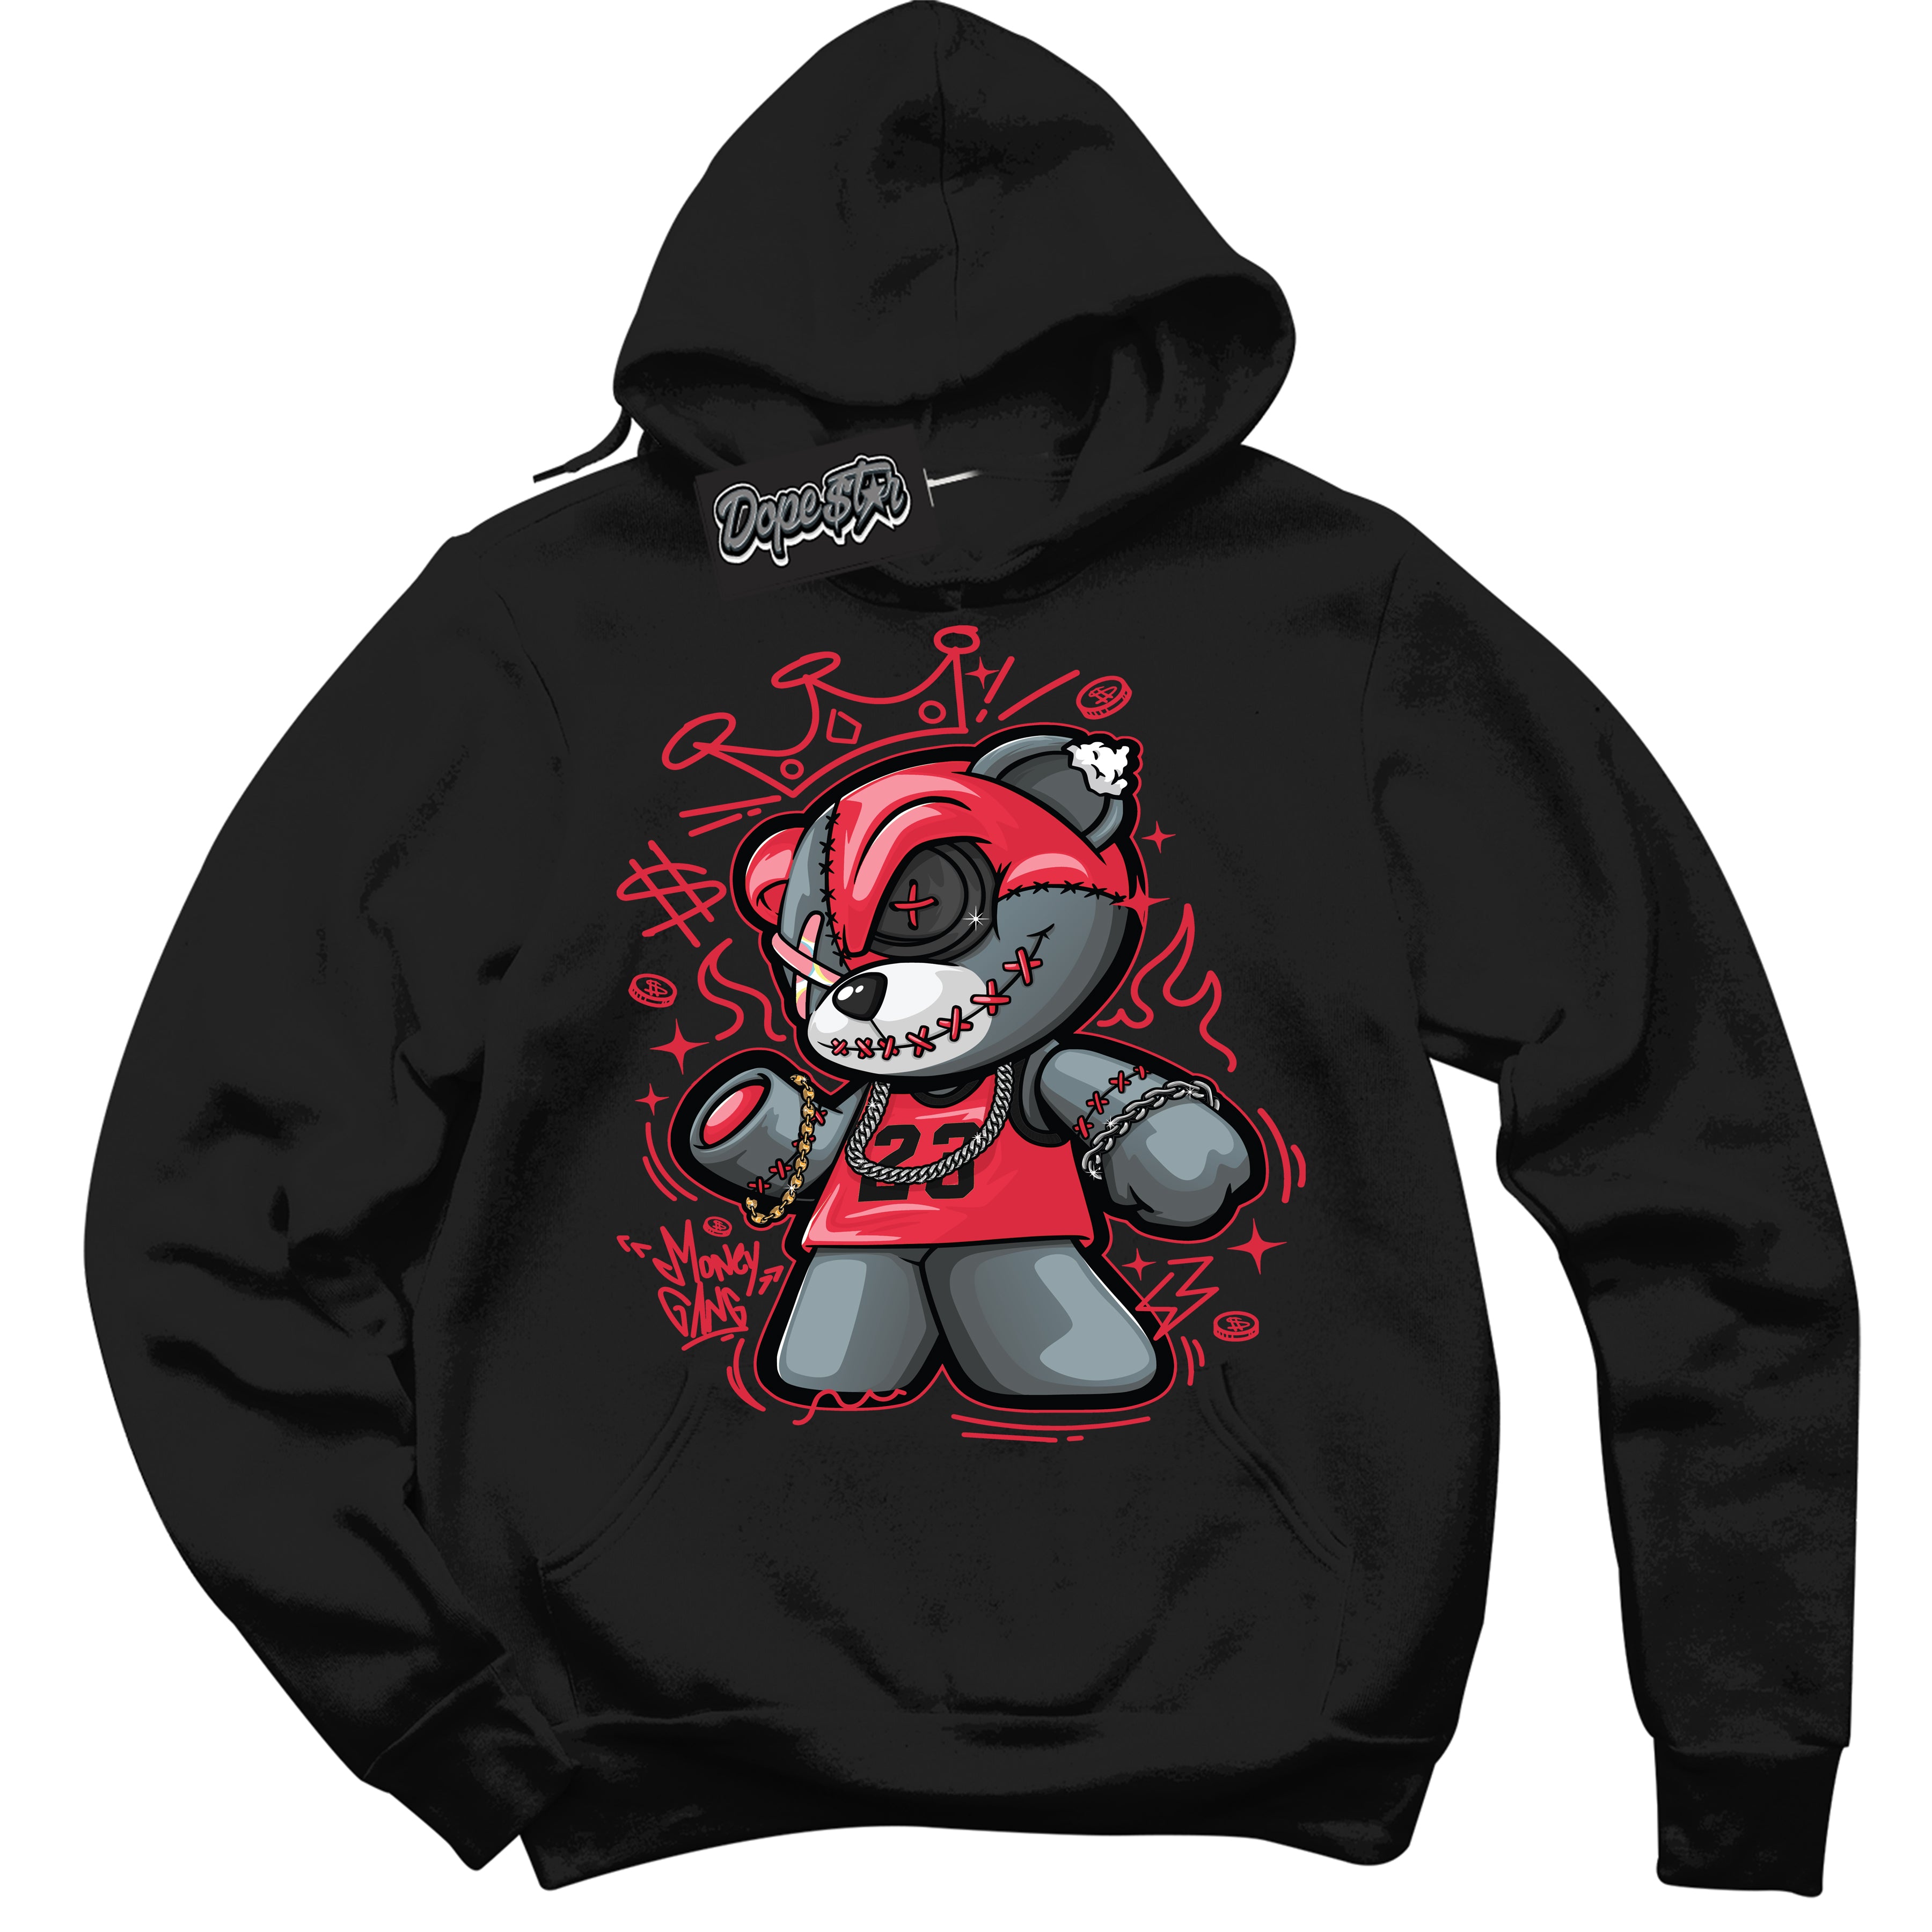 Cool Black Graphic DopeStar Hoodie with “ Money Gang Bear “ print, that perfectly matches Spider-Verse 1s sneakers